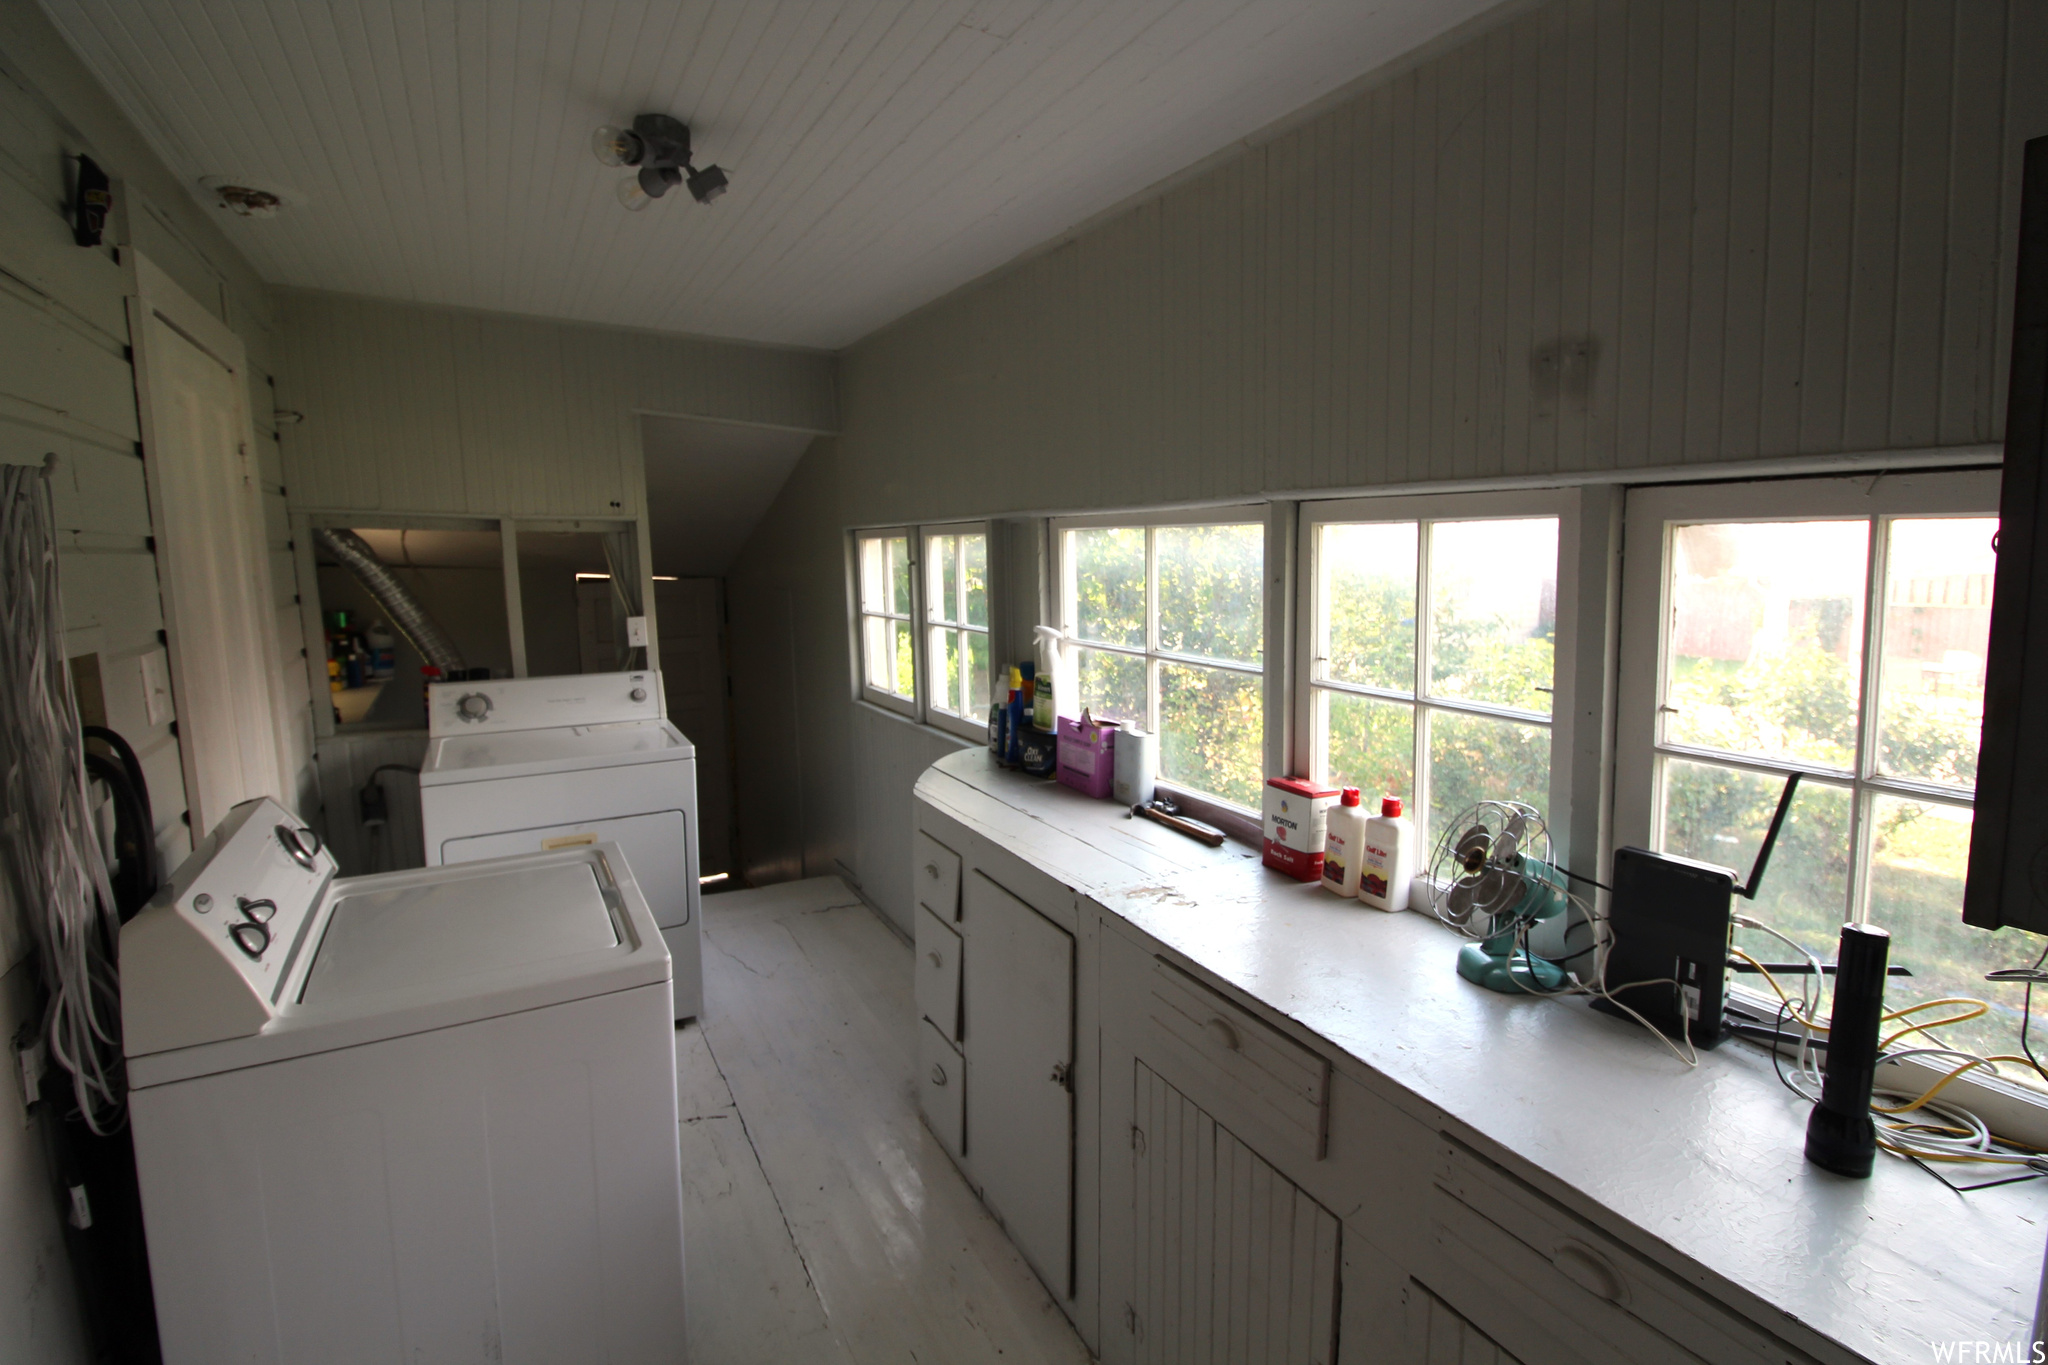 View of main utility area from kitchen door.  Great counterspace and original cabinetry for tons of auxiliary kitchen storage and workspace.  Windows look out into the side / rose garden.